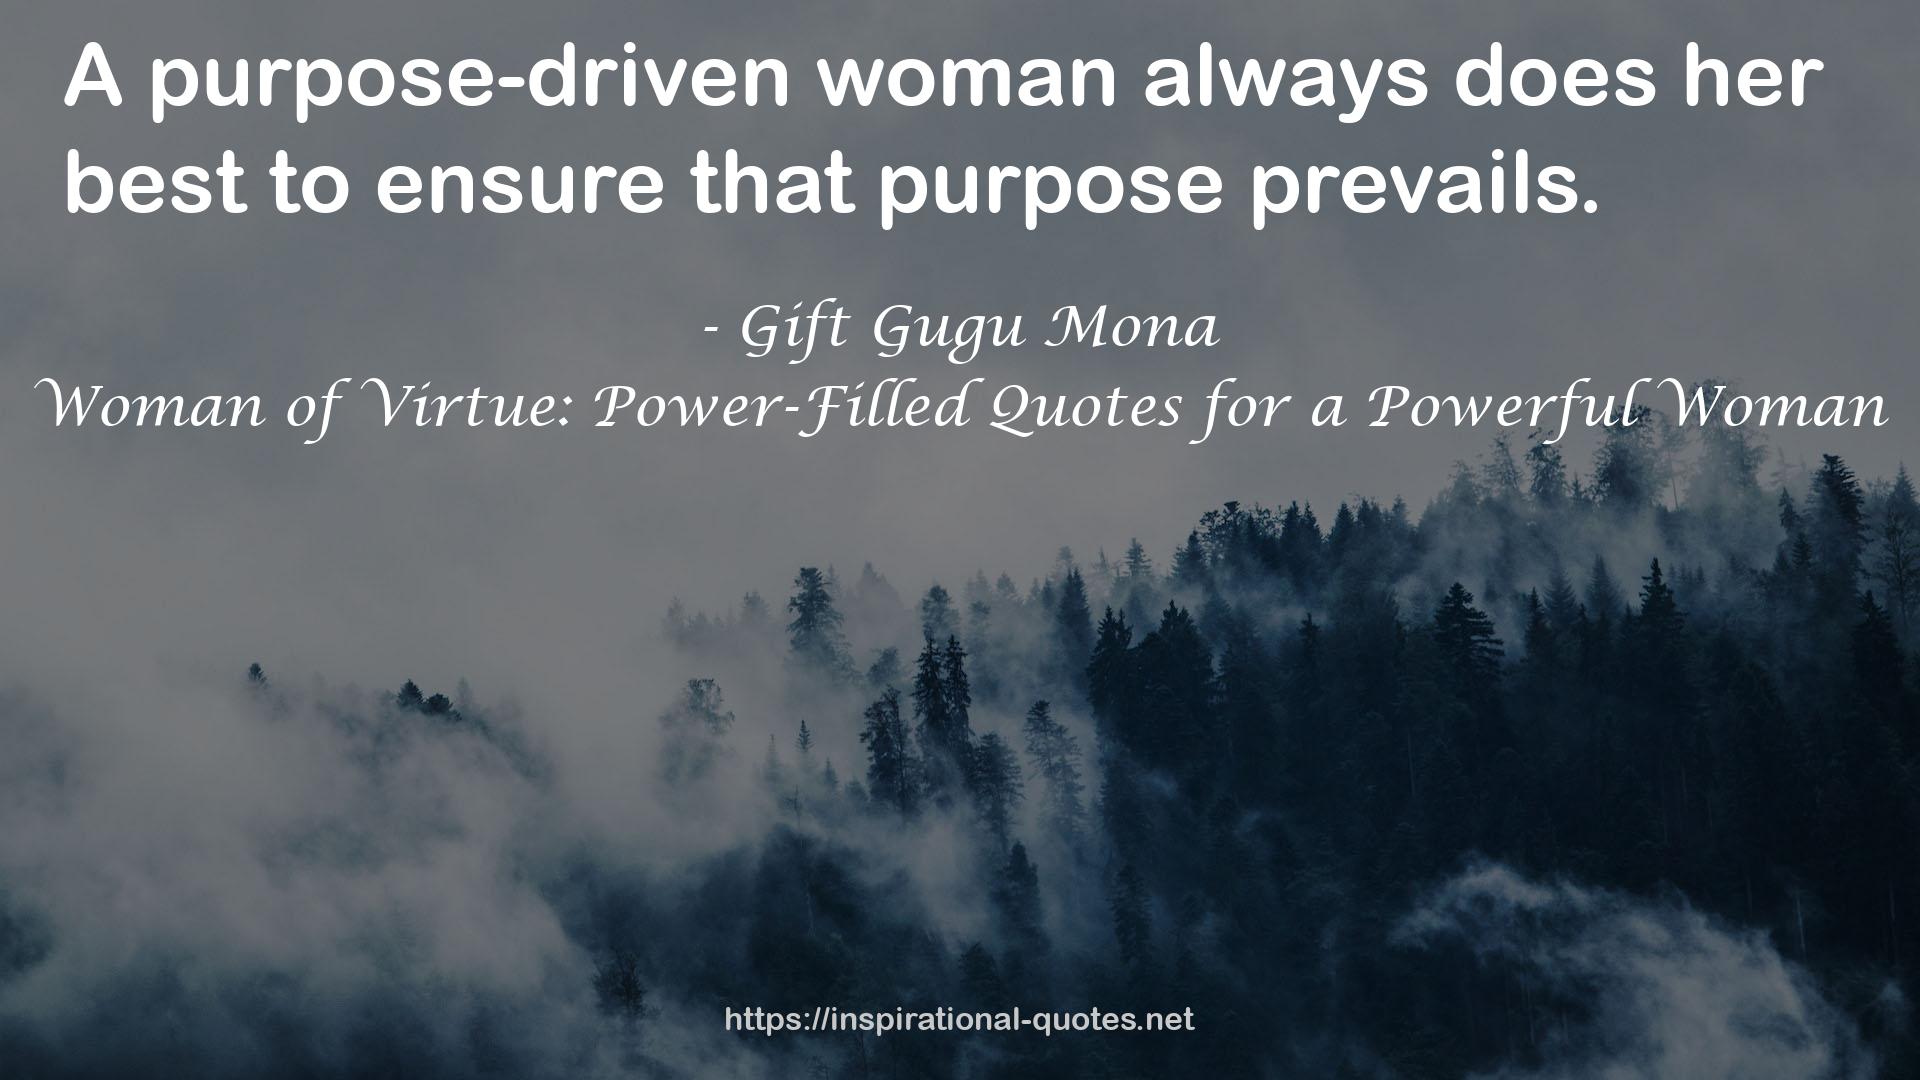 Woman of Virtue: Power-Filled Quotes for a Powerful Woman QUOTES